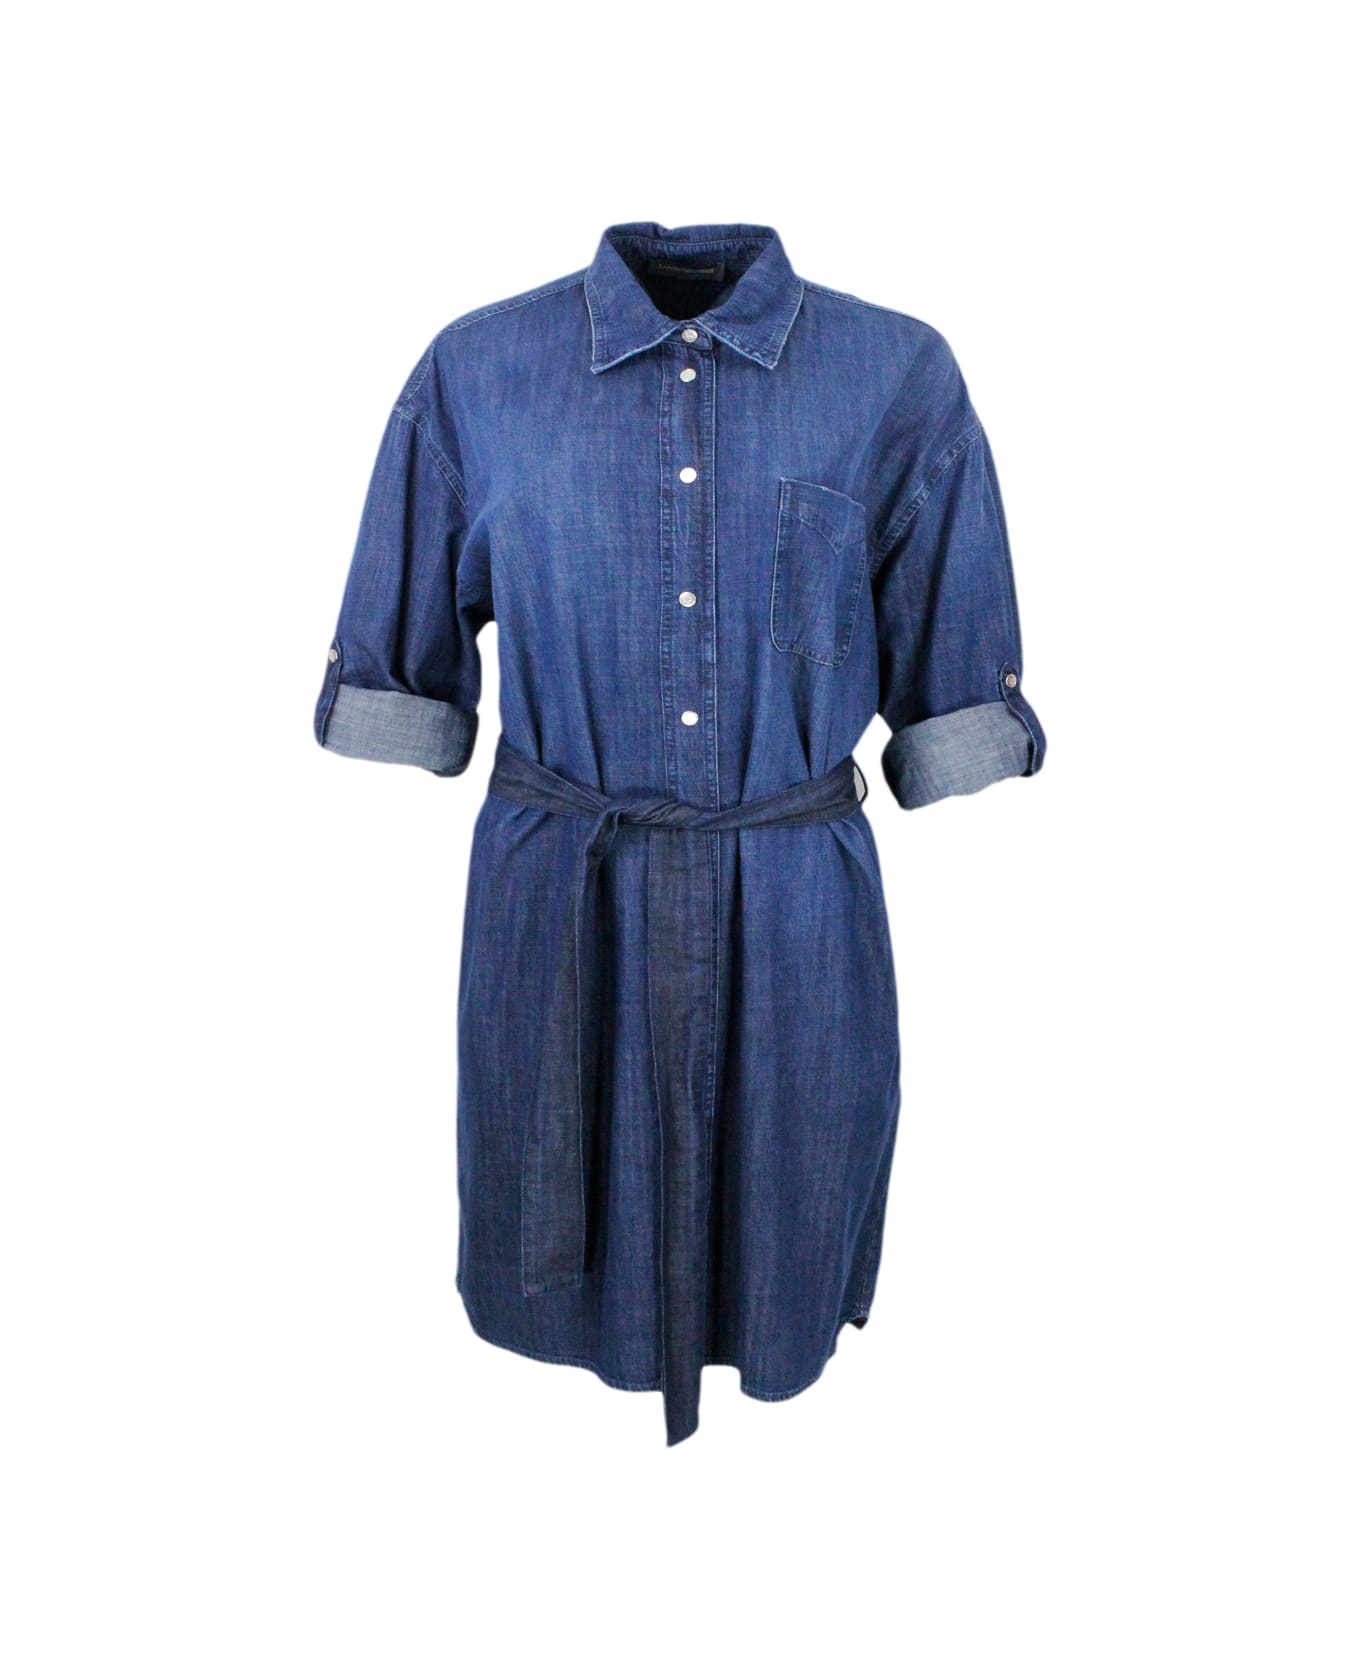 Lorena Antoniazzi Shirt Dress In Light Chambray Denim Cotton With Long Sleeves With Button Closure And Belt At The Waist - Denim